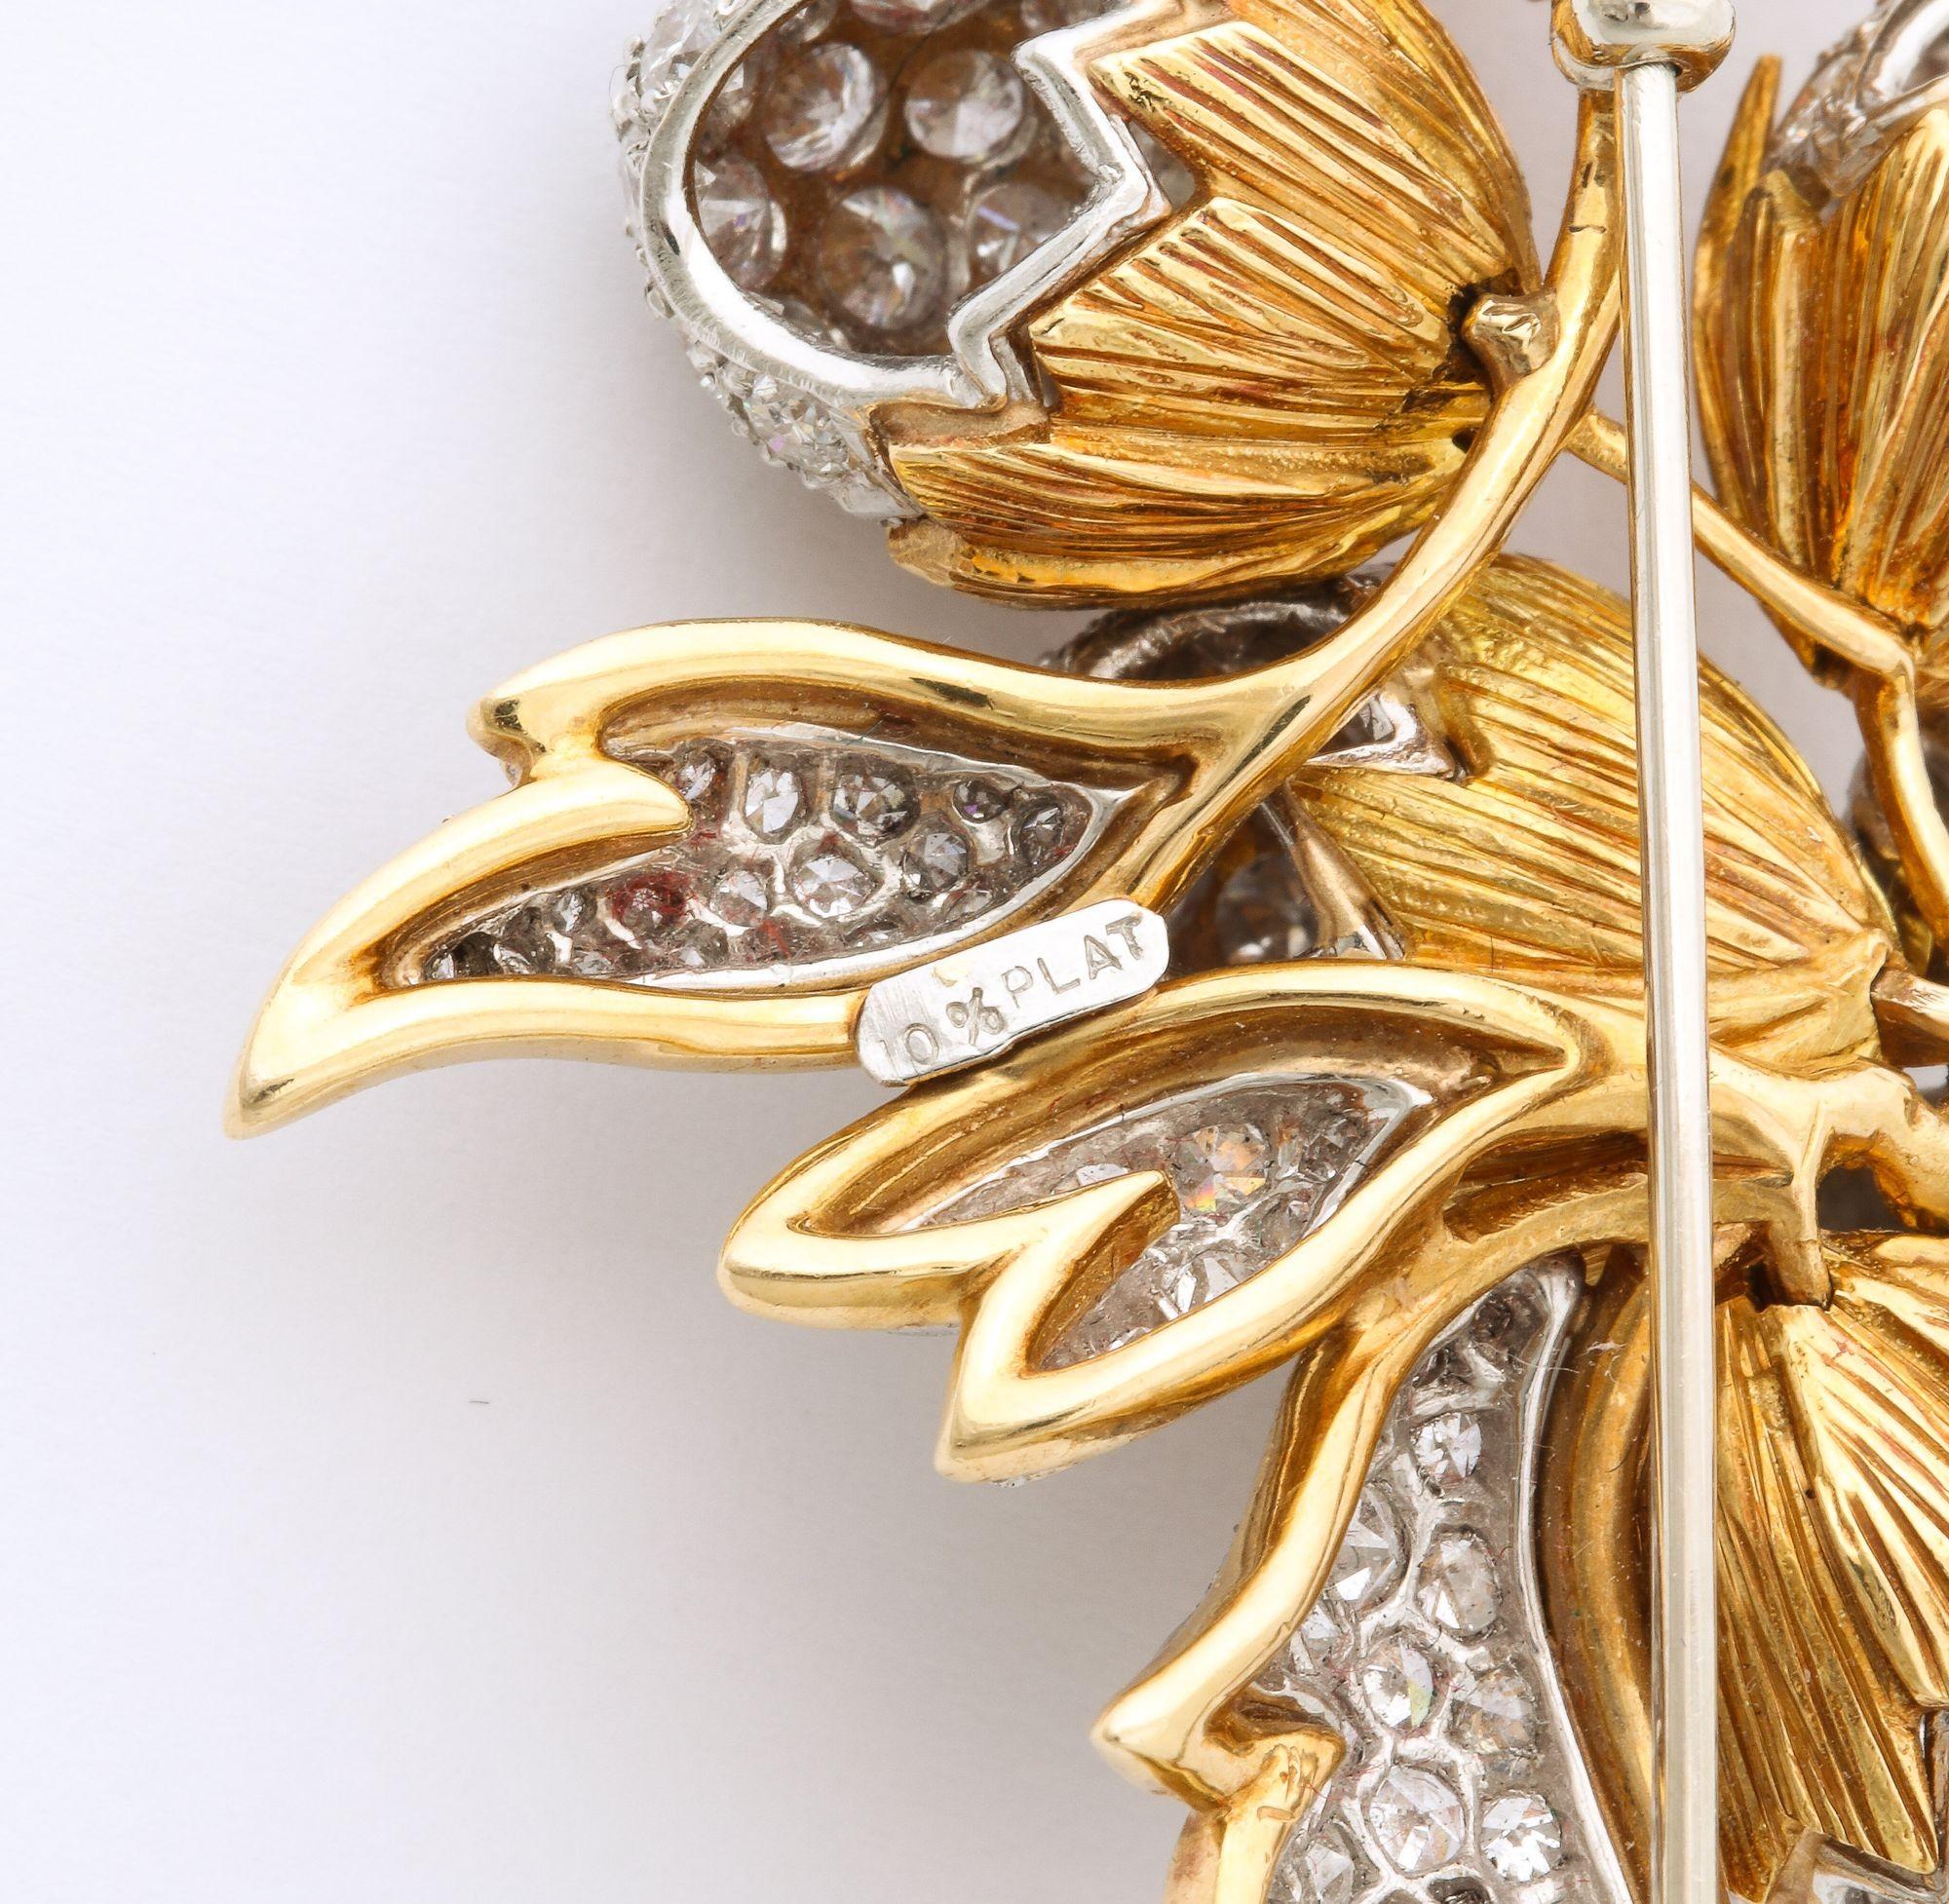 18K Gold and Platinum Brooch with Diamond Acorns and Leaves 1